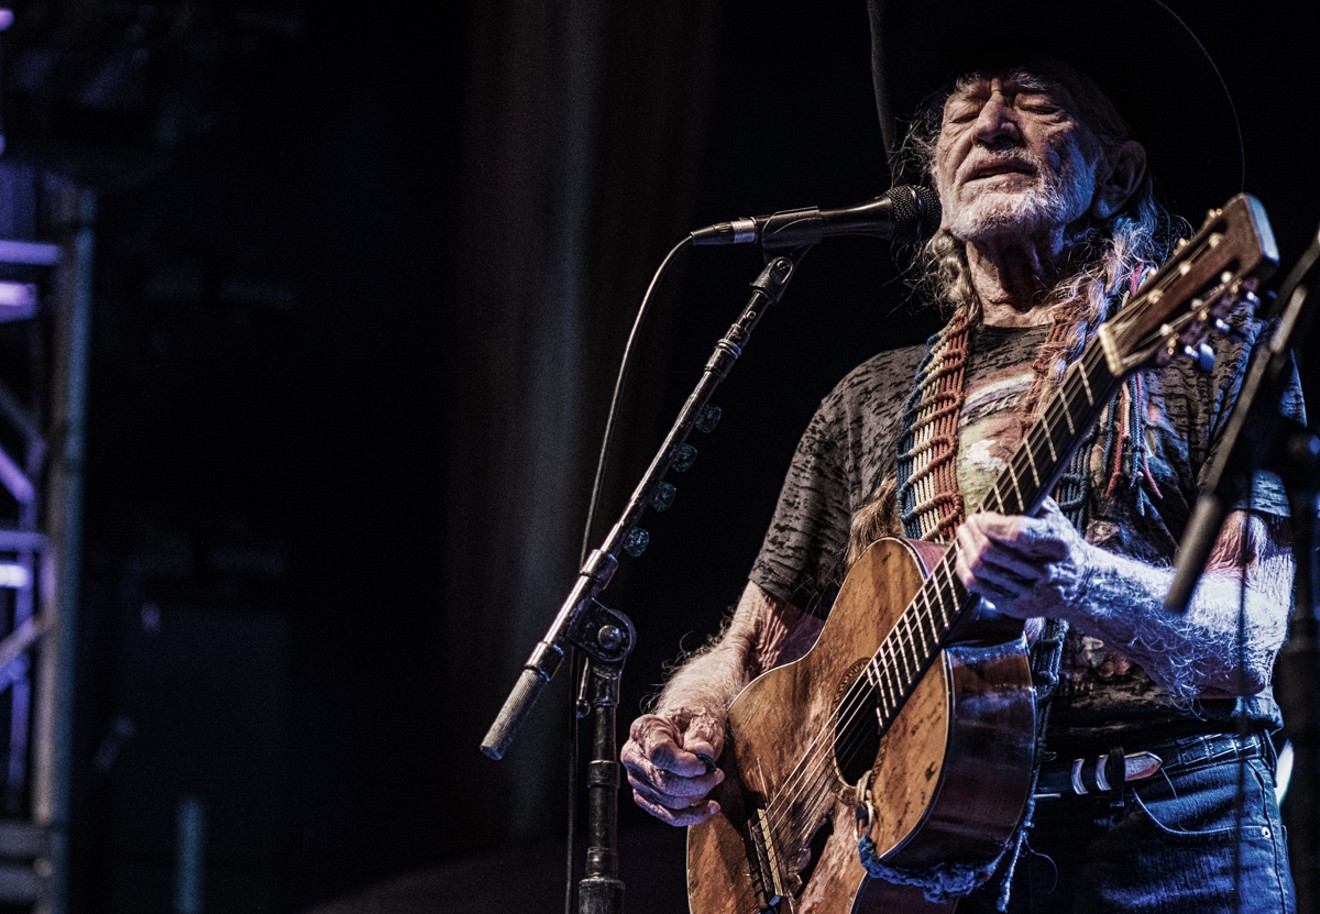 Willie Nelson's shows might not be quite as facile as they were in his younger years, but once the 83-year-old legend had warmed up he was able to hit some of the same notes he did back when the IRS was after him.